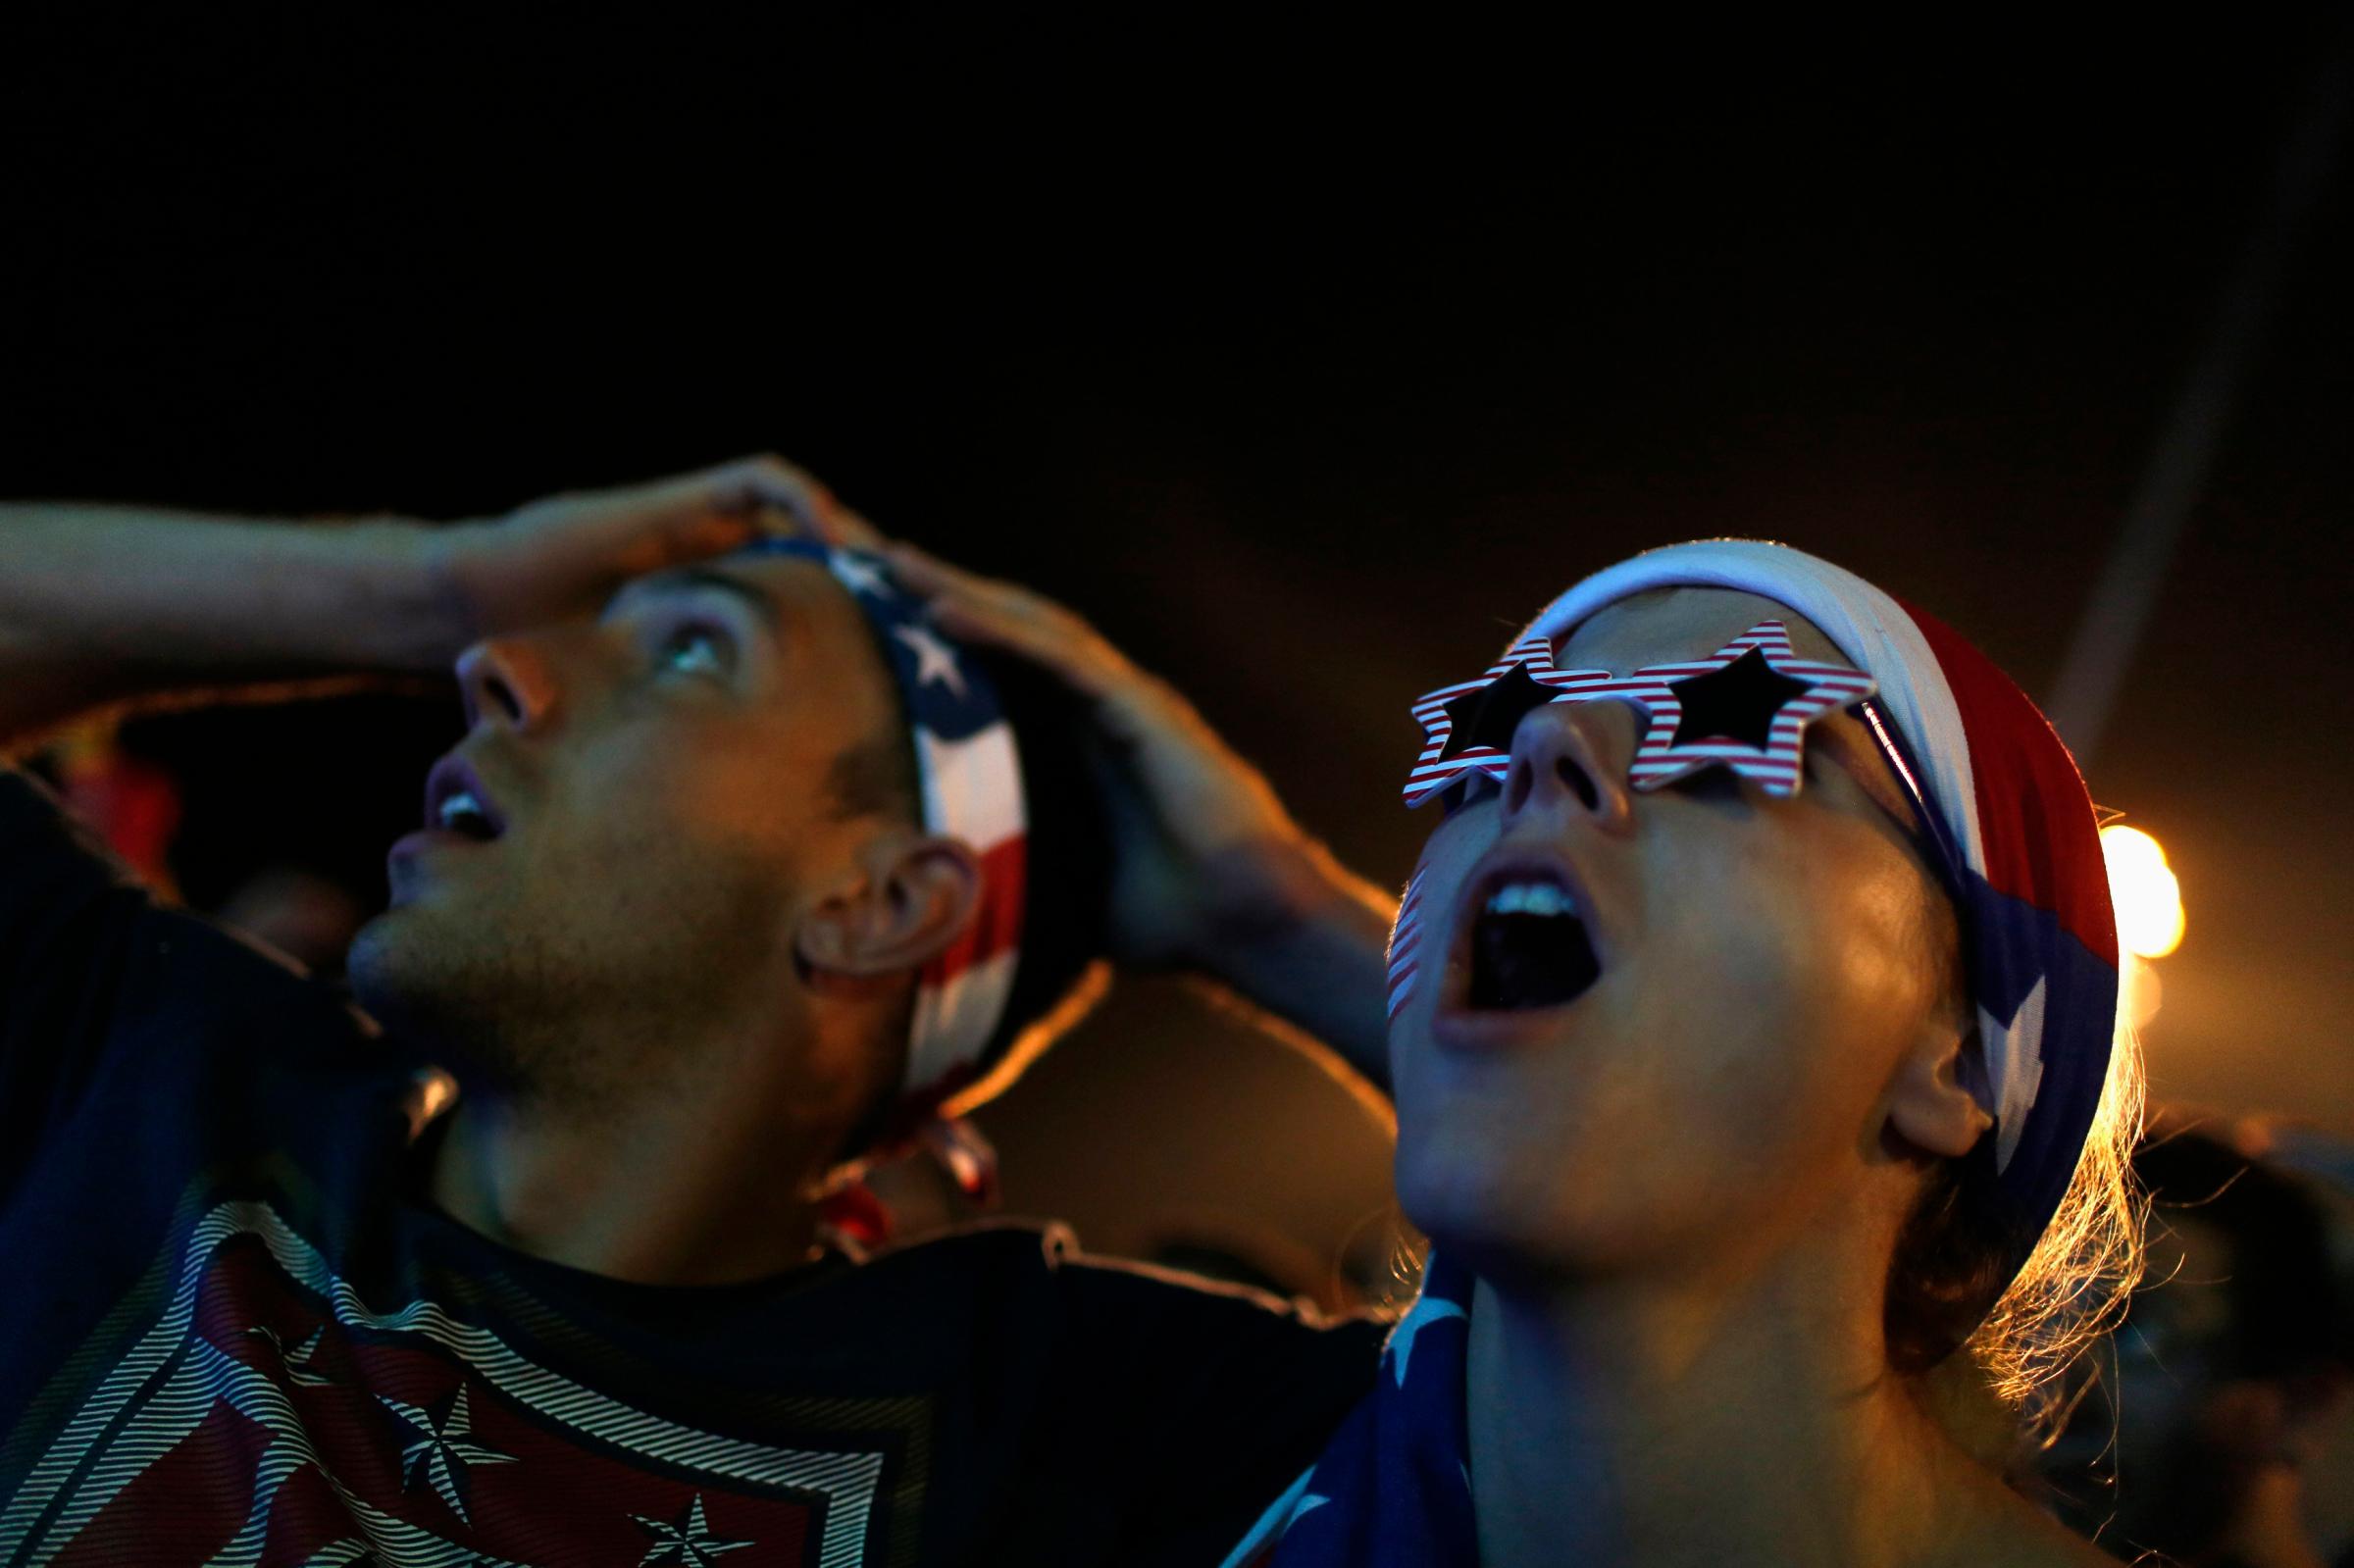 U.S. soccer fans react  as they watch the 2014 World Cup soccer match between U.S. and Ghana, which is broadcast on a large screen at Copacabana beach, in Rio de Janeiro